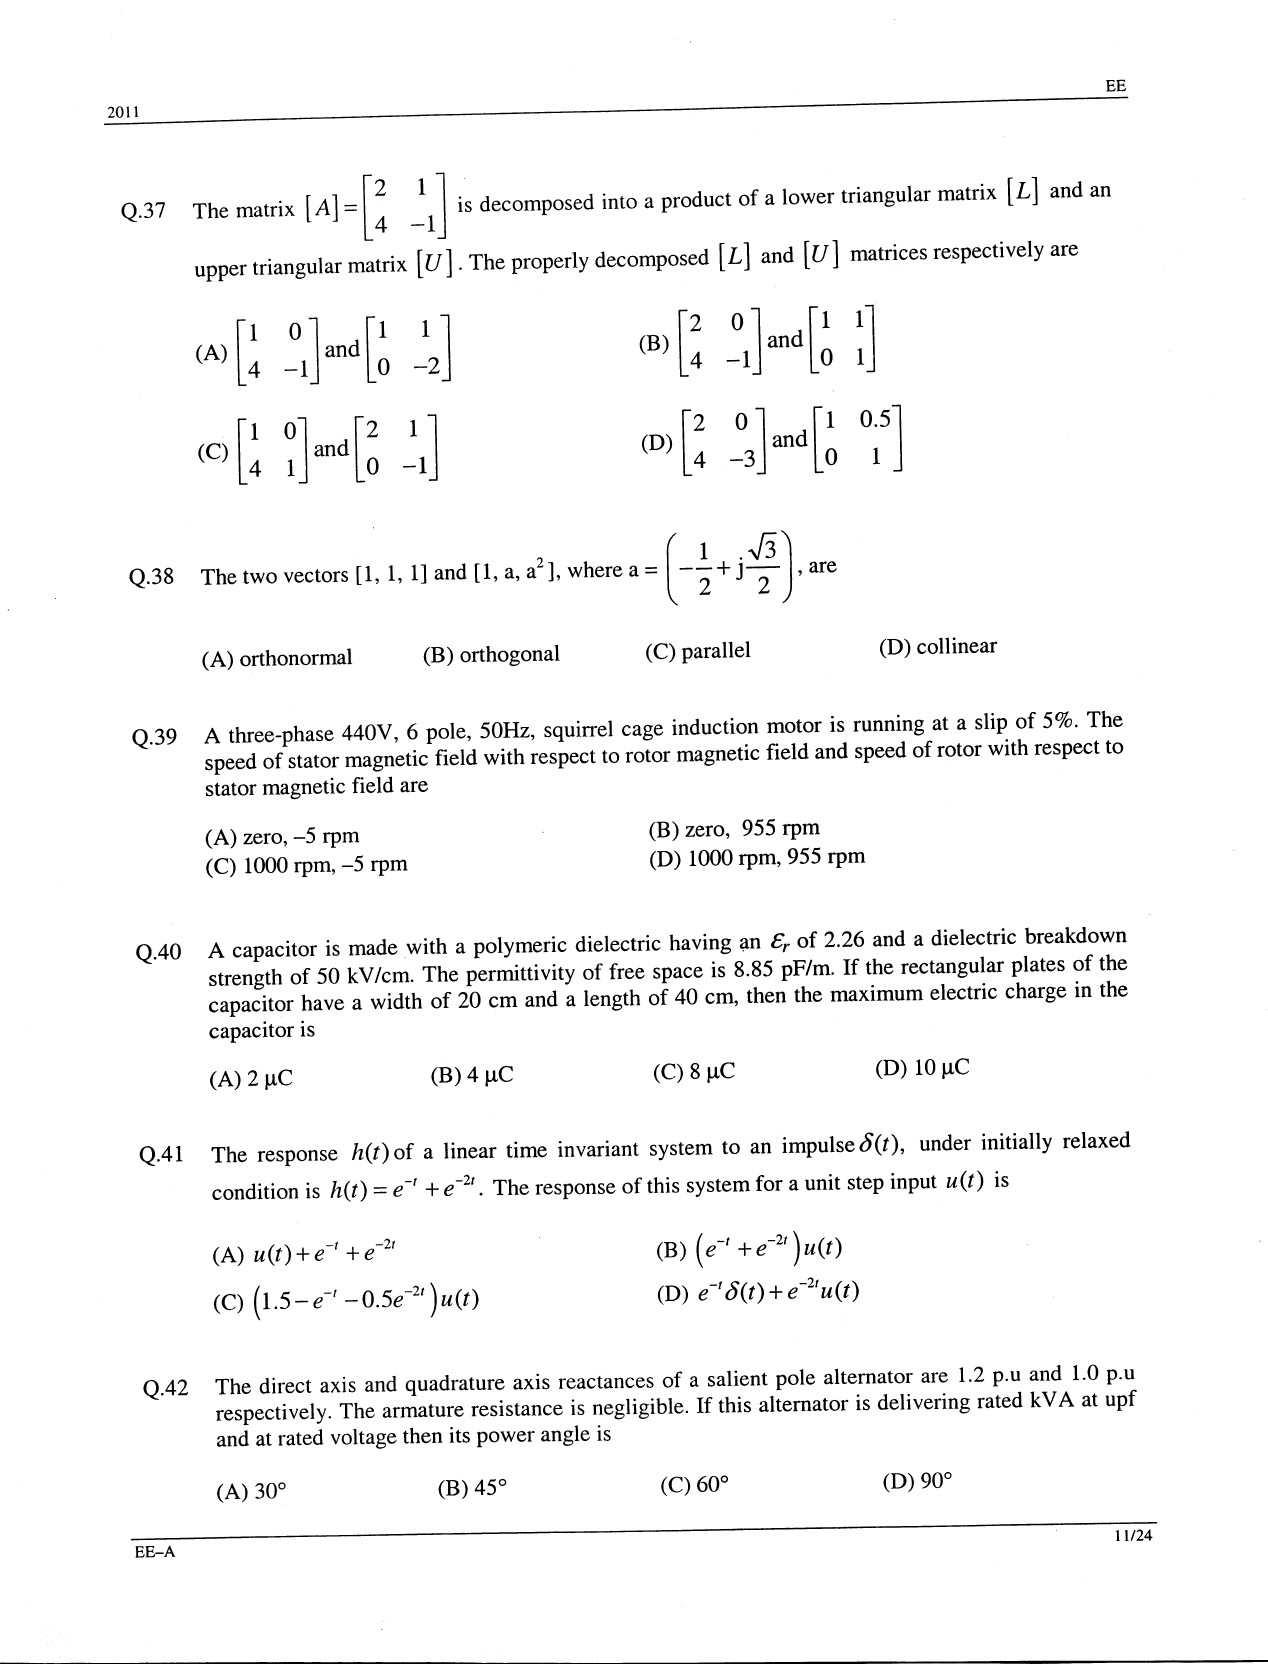 GATE Exam Question Paper 2011 Electrical Engineering 11